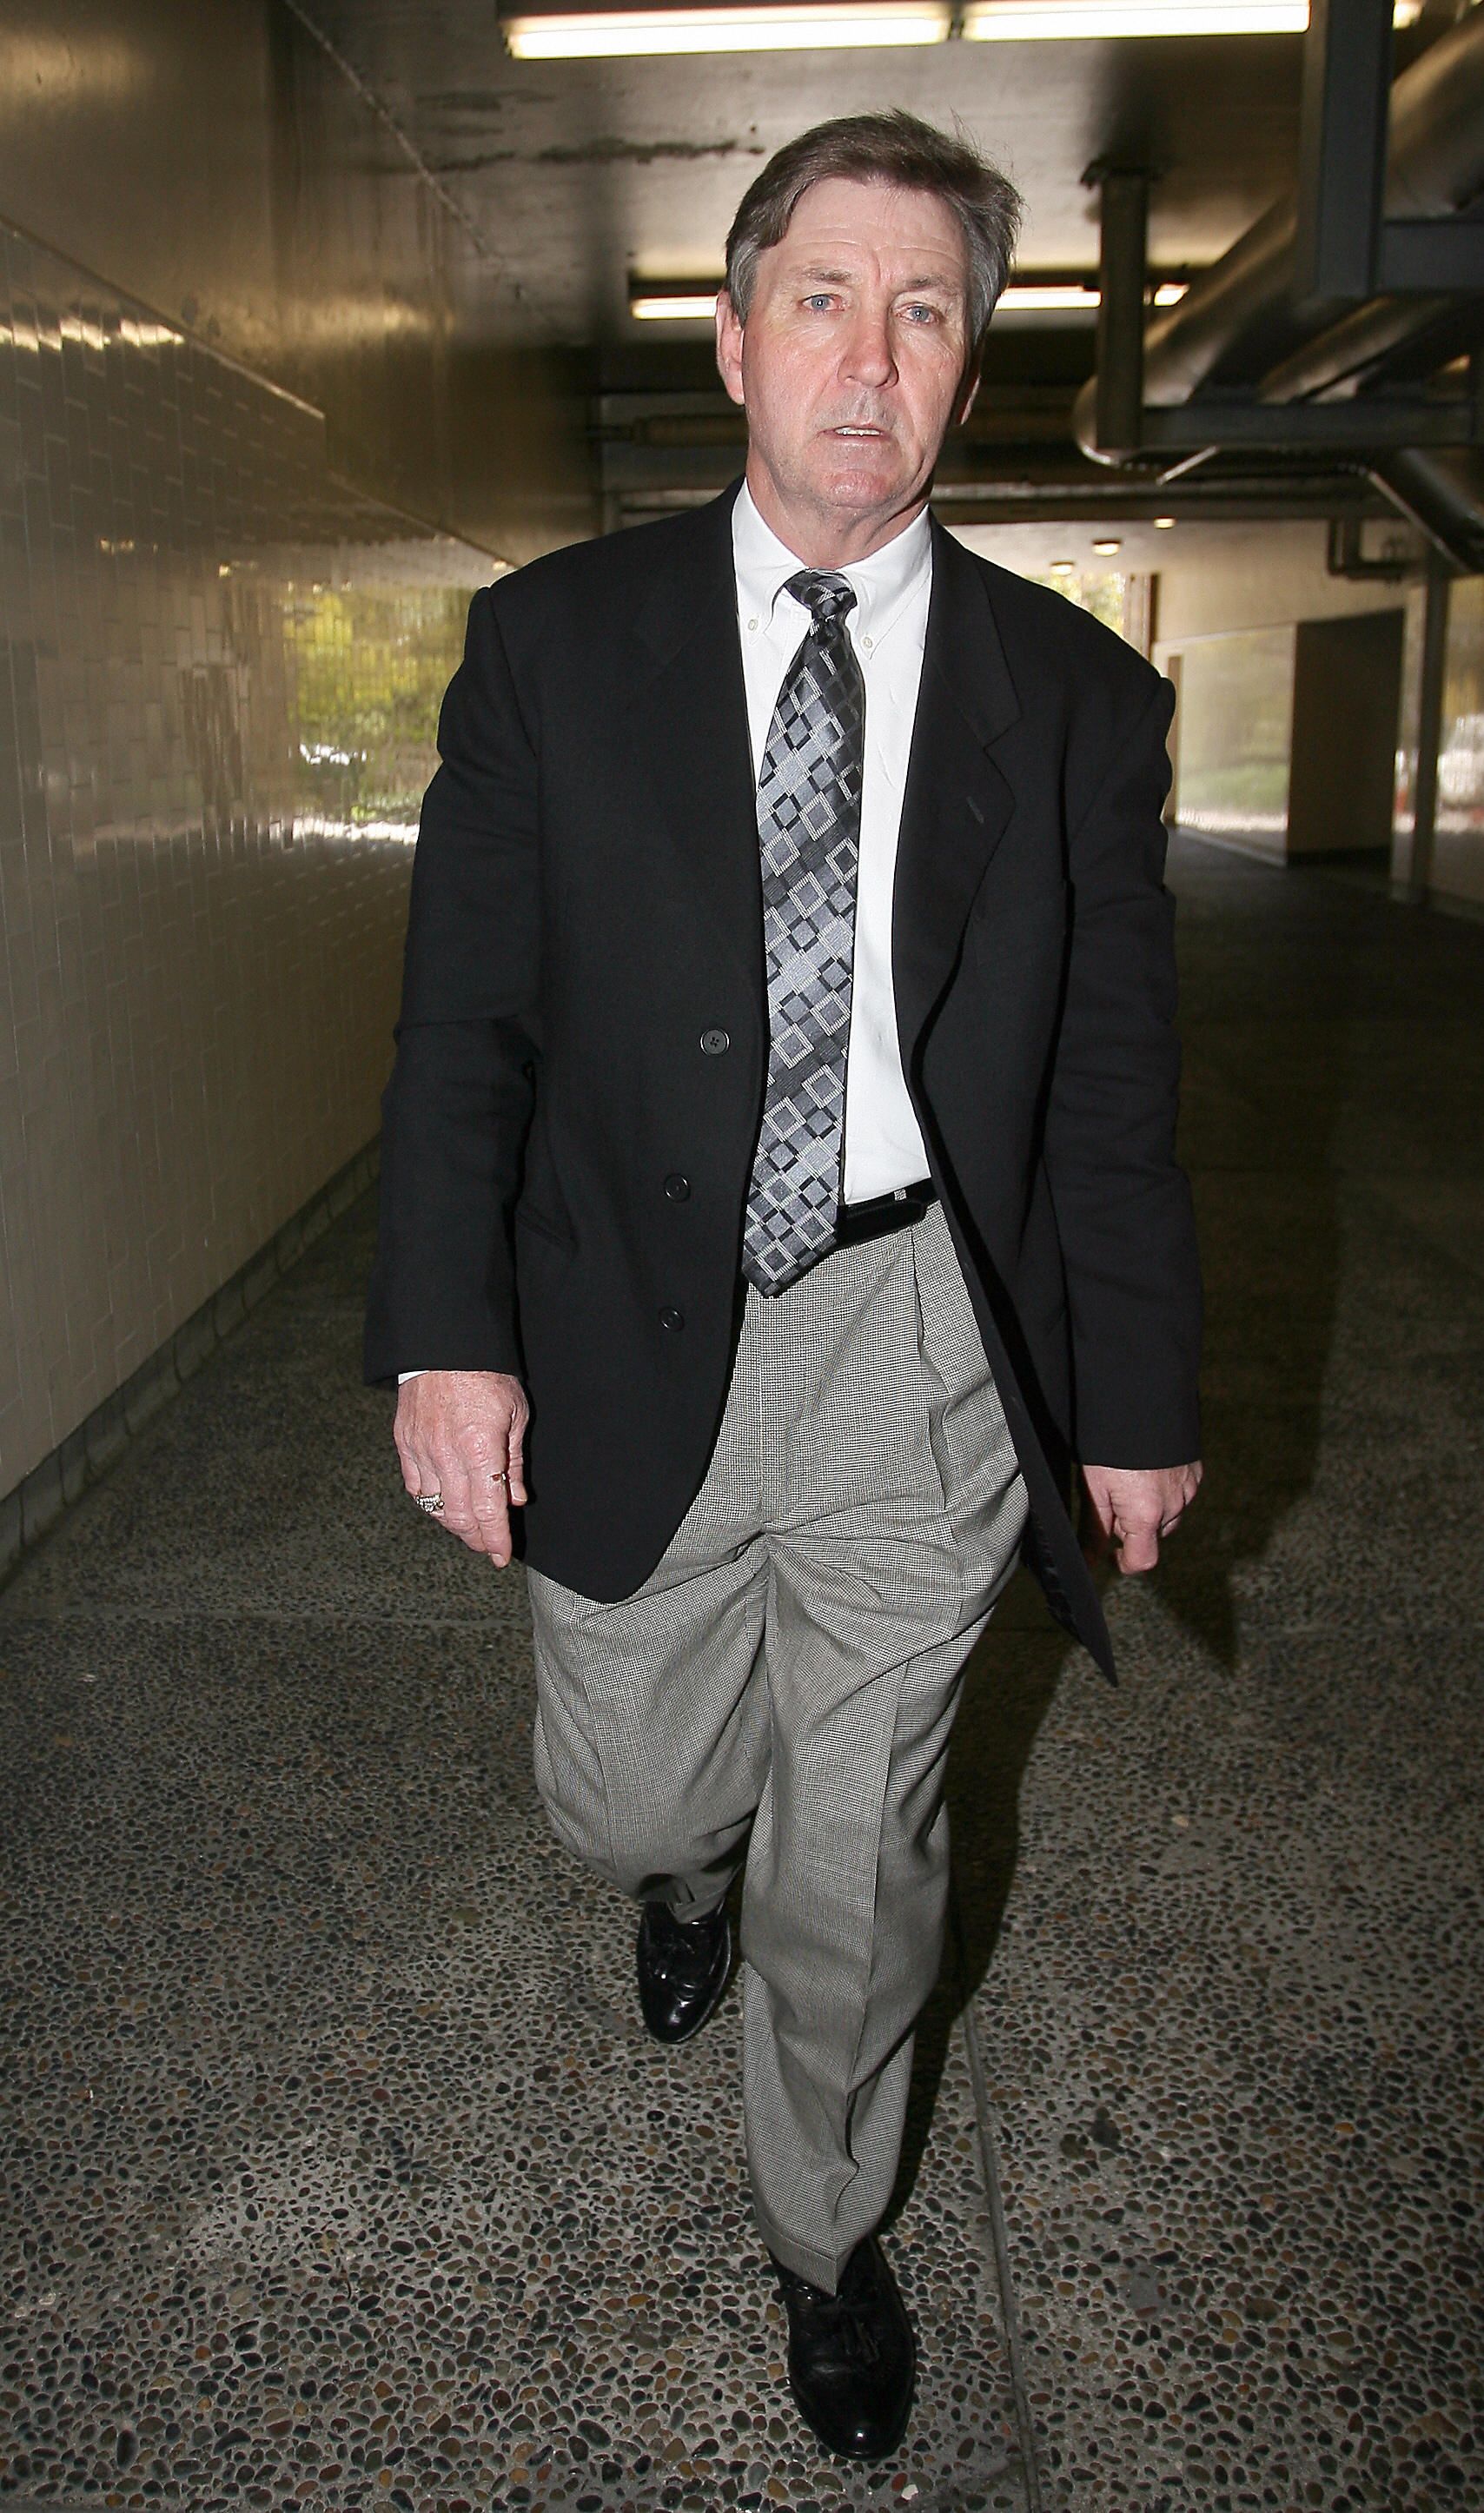 Britney Spears' father, Jamie Spears leaving the Los Angeles County Superior courthouse in Los Angeles, California | Photo: Valerie Macon/AFP via Getty Images